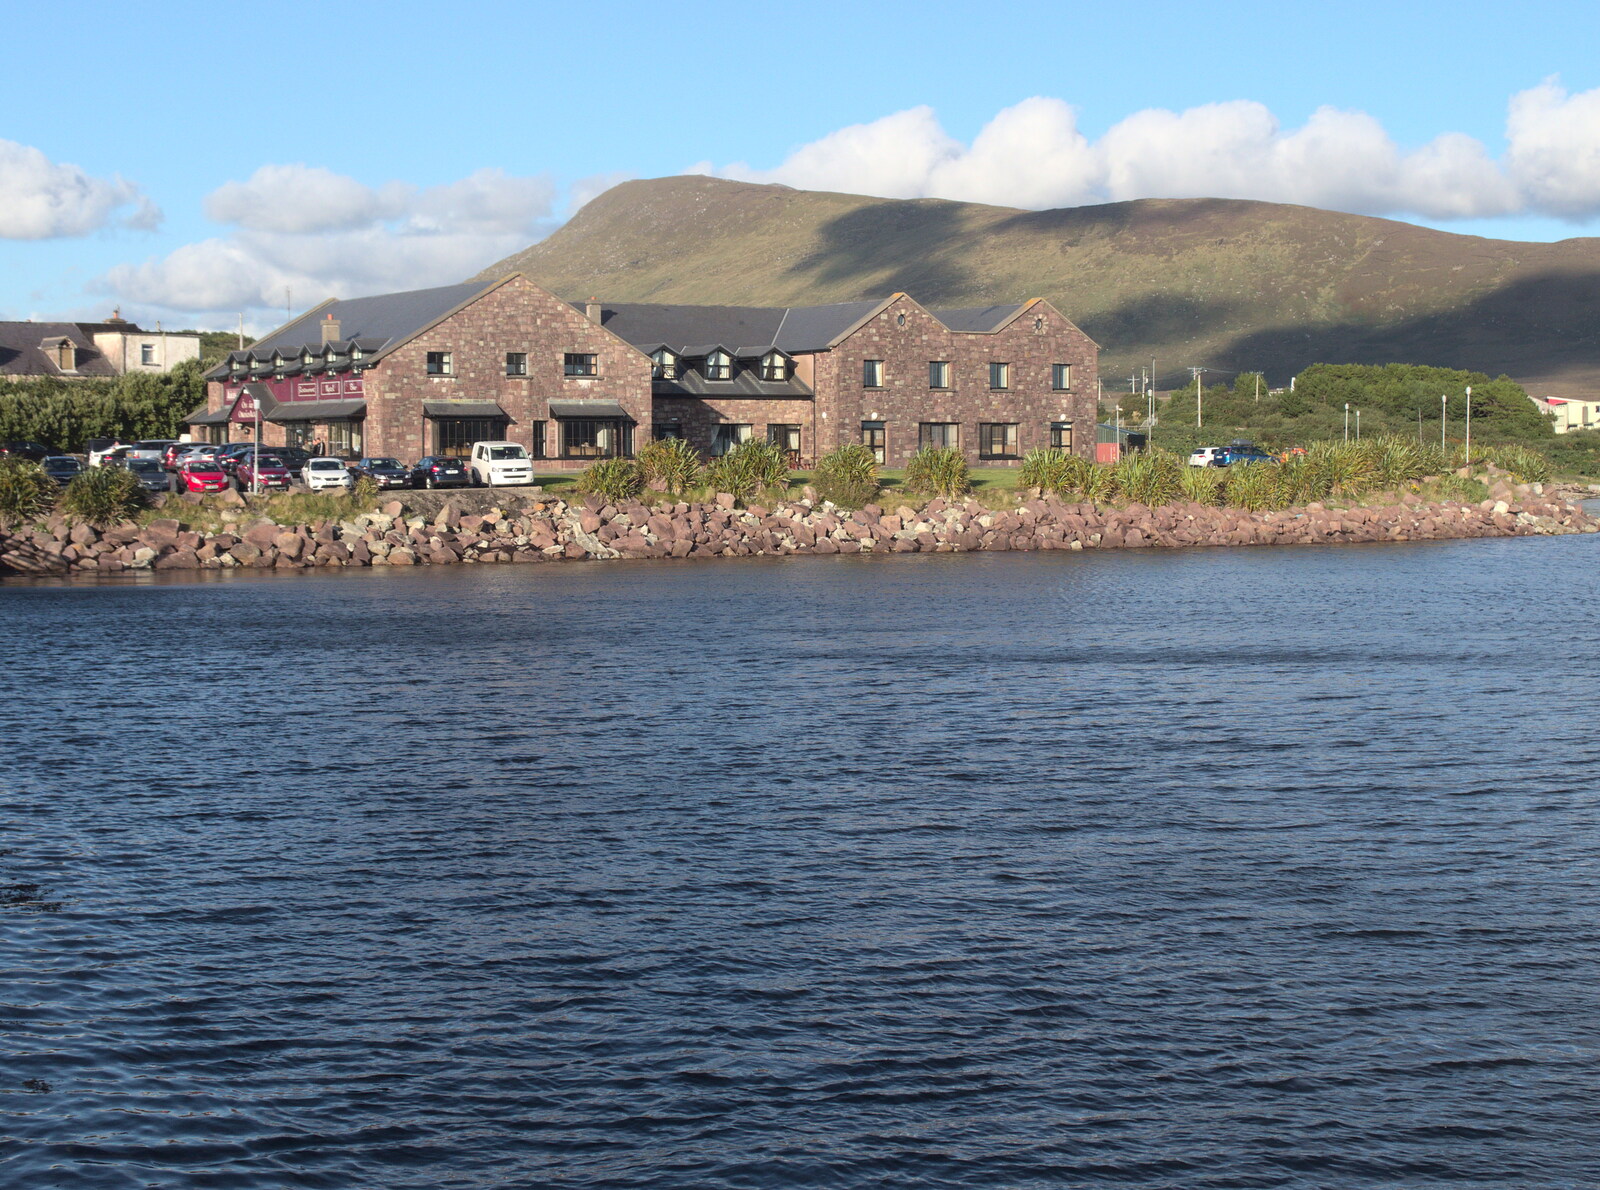 Our hotel, as seen from the island from Surfing Achill Island, Oileán Acla, Maigh Eo, Ireland - 8th August 2017